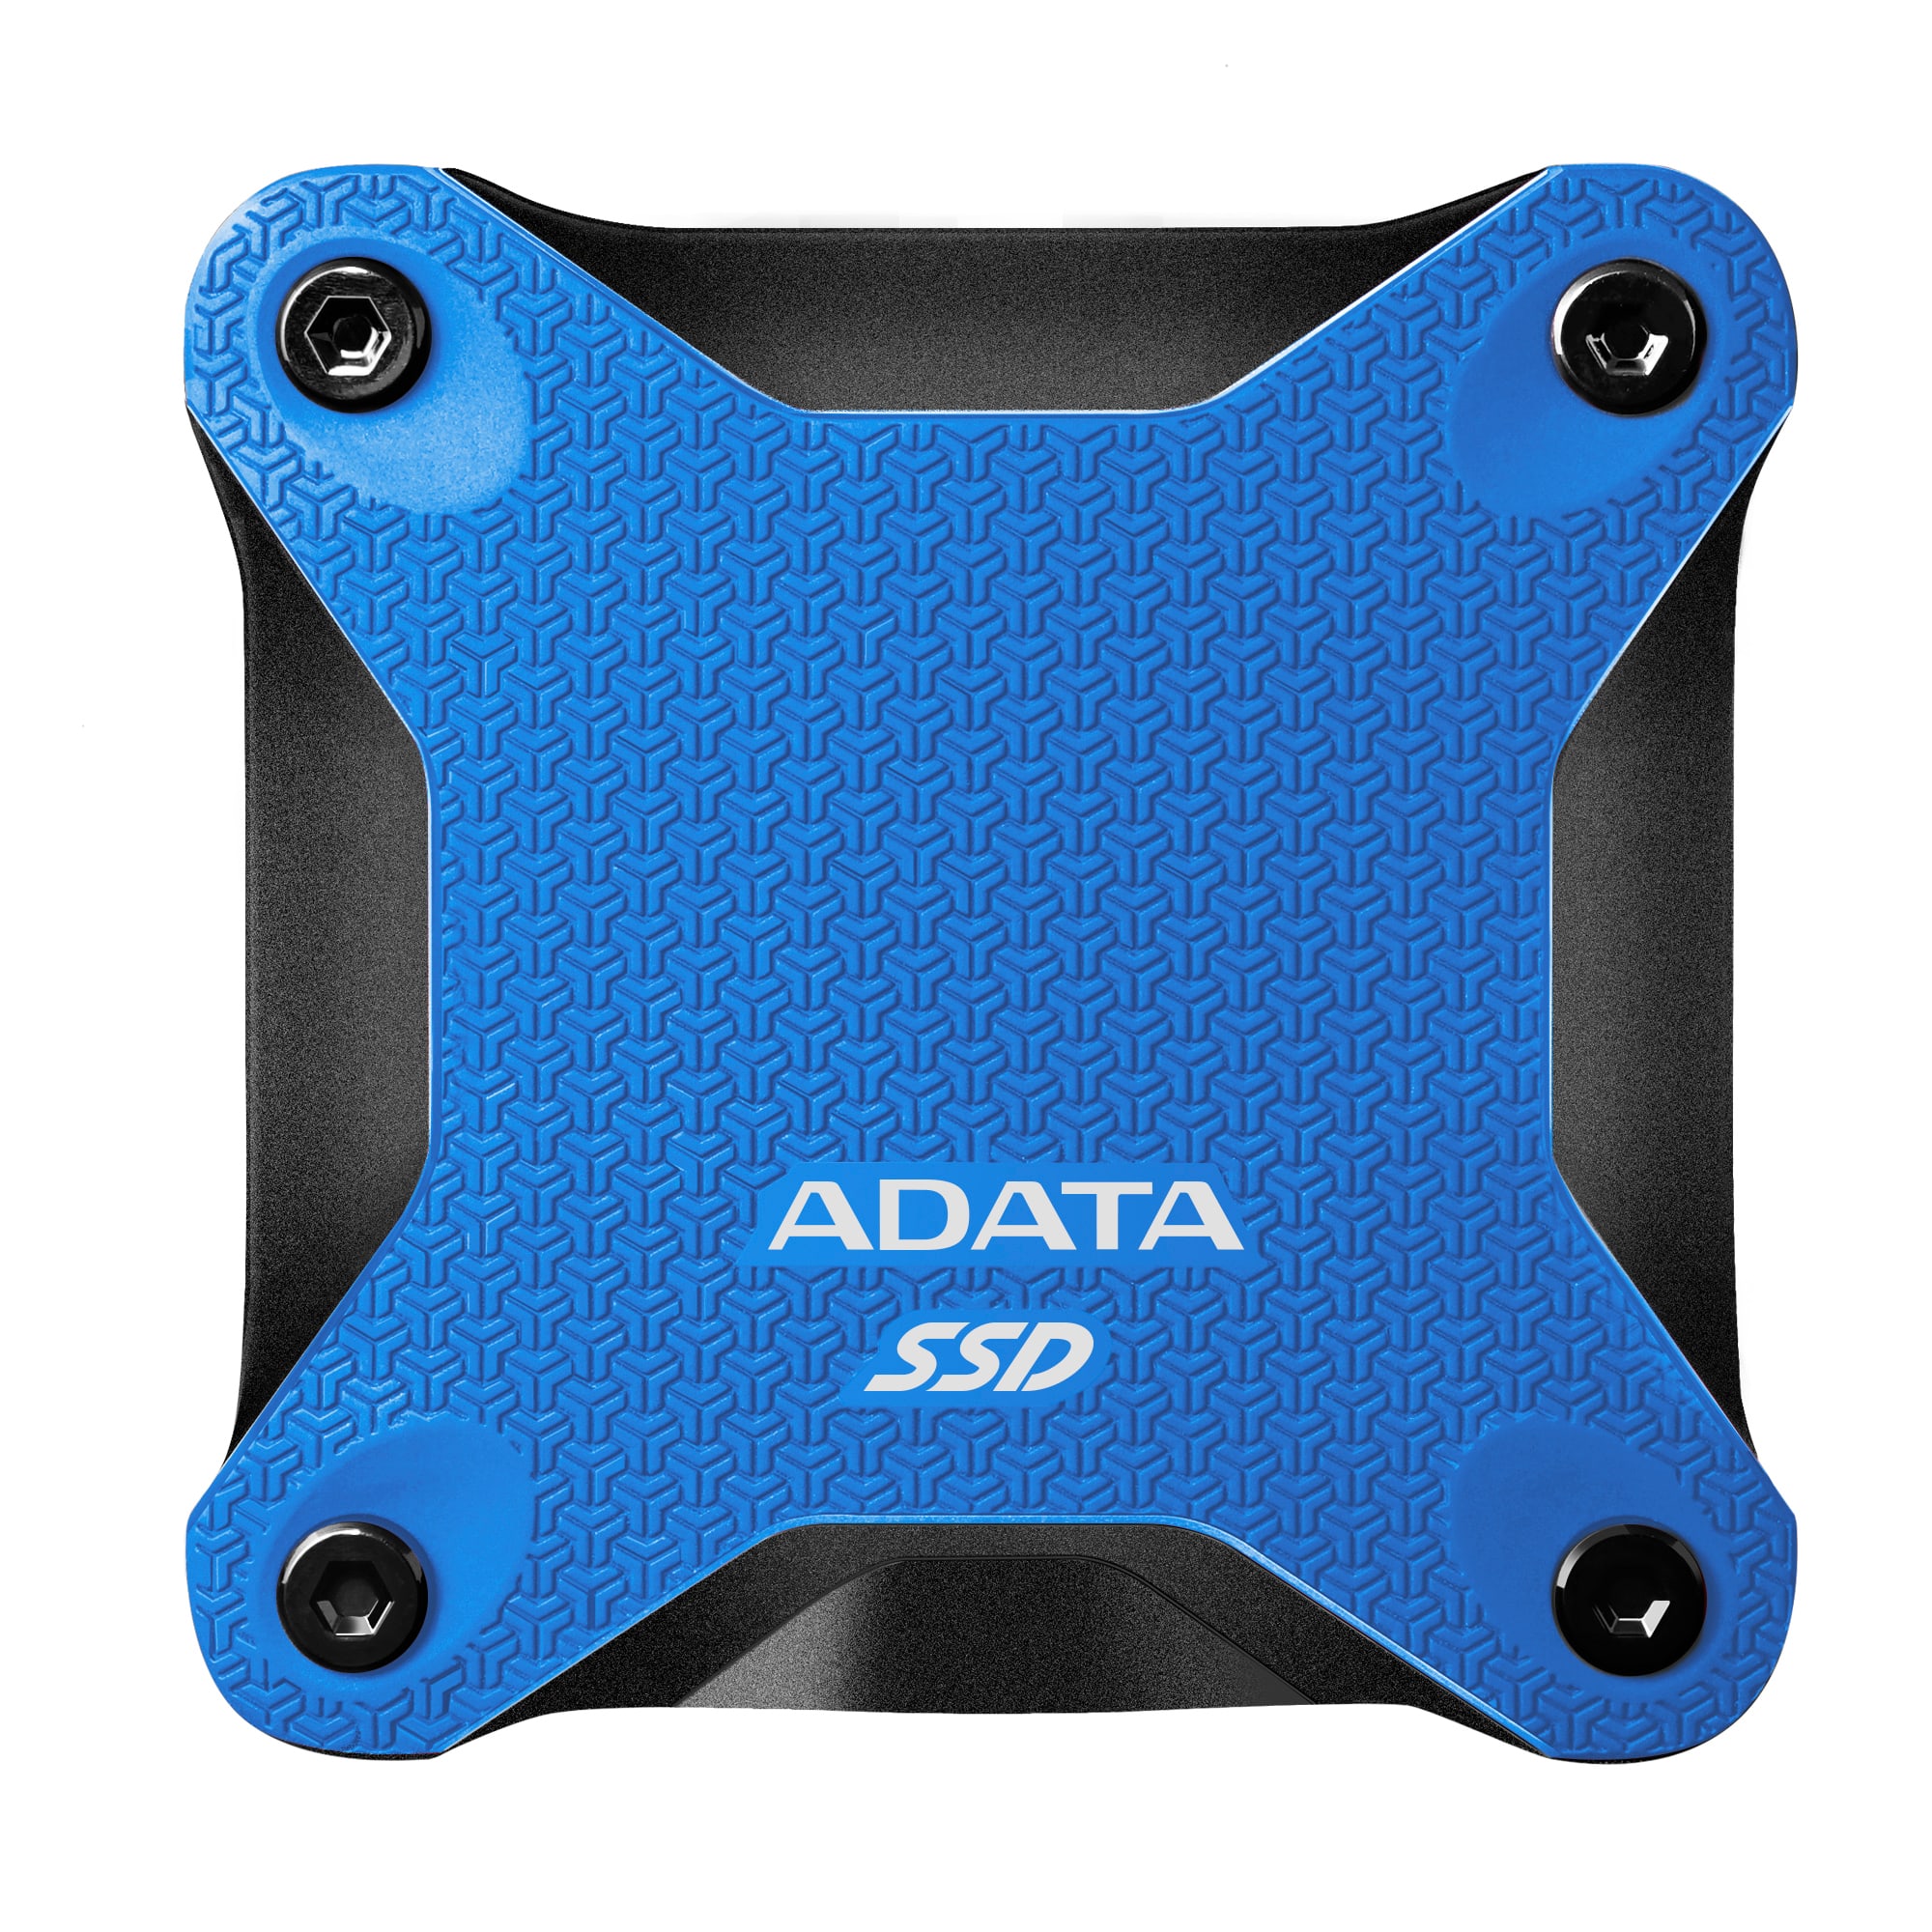 A-Data SSD SD600Q, 480GB, USB 3.2-rychlost 440/430 MB/s (ASD600Q-480GU31-CRD), Red